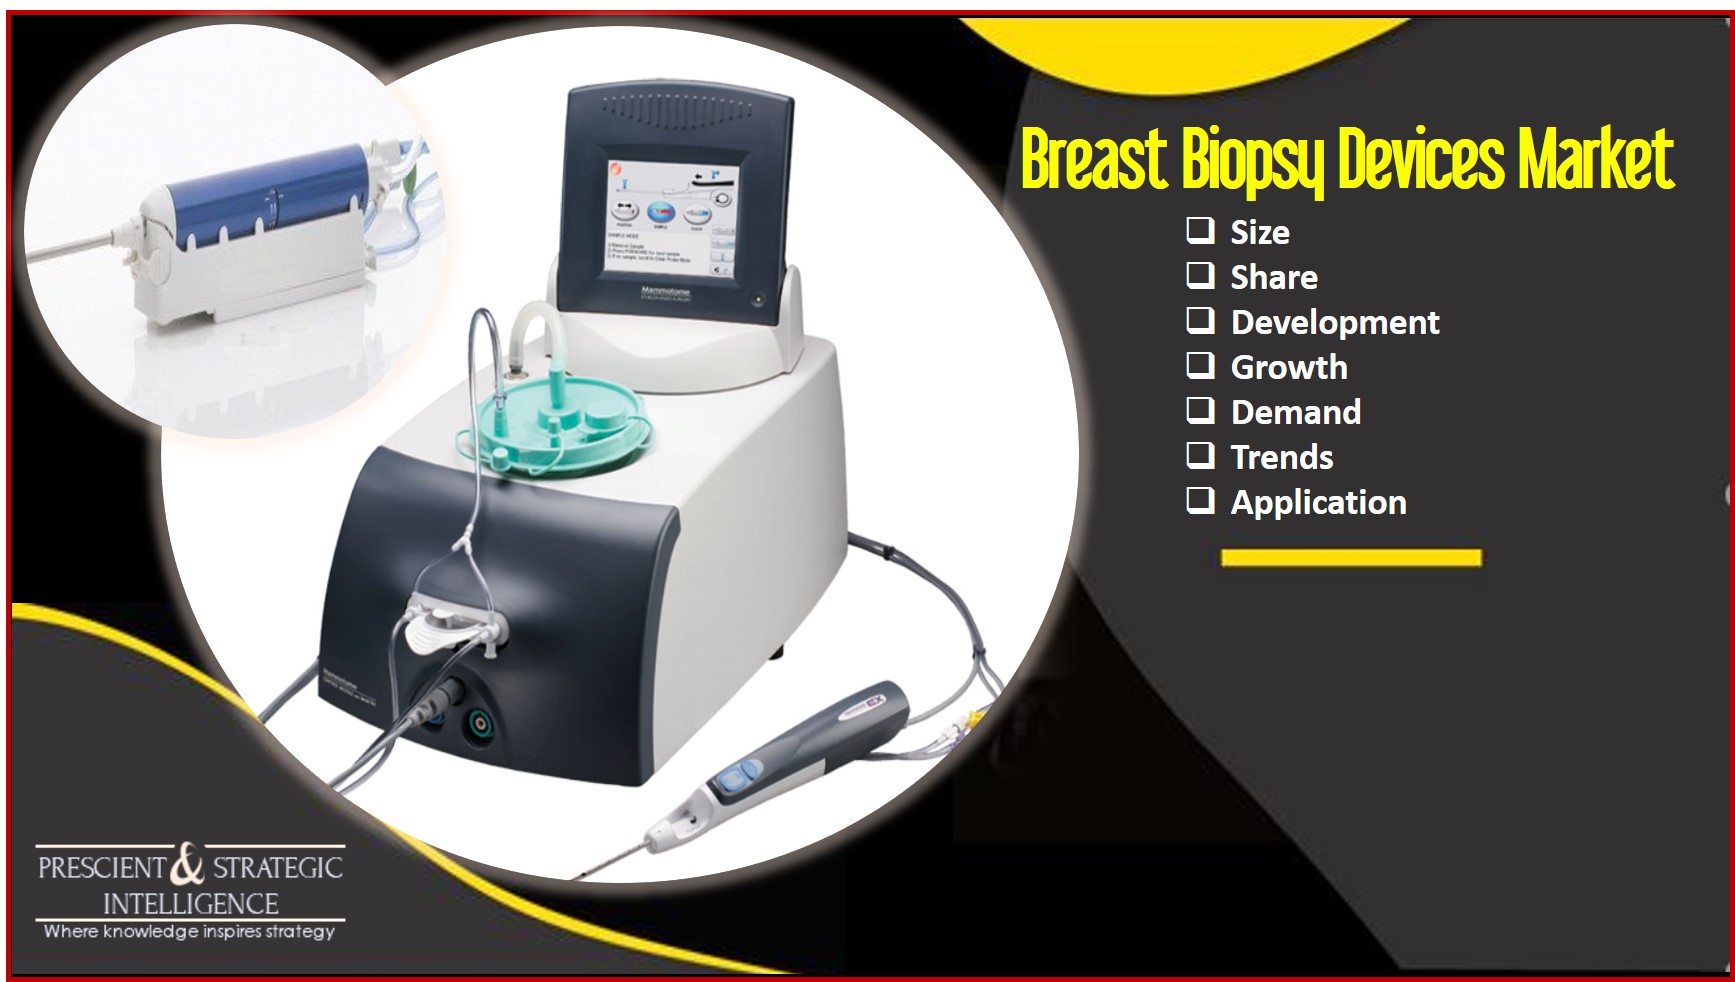 Rising Breast Cancer Prevalence to Drive Breast Biopsy Devices Market 